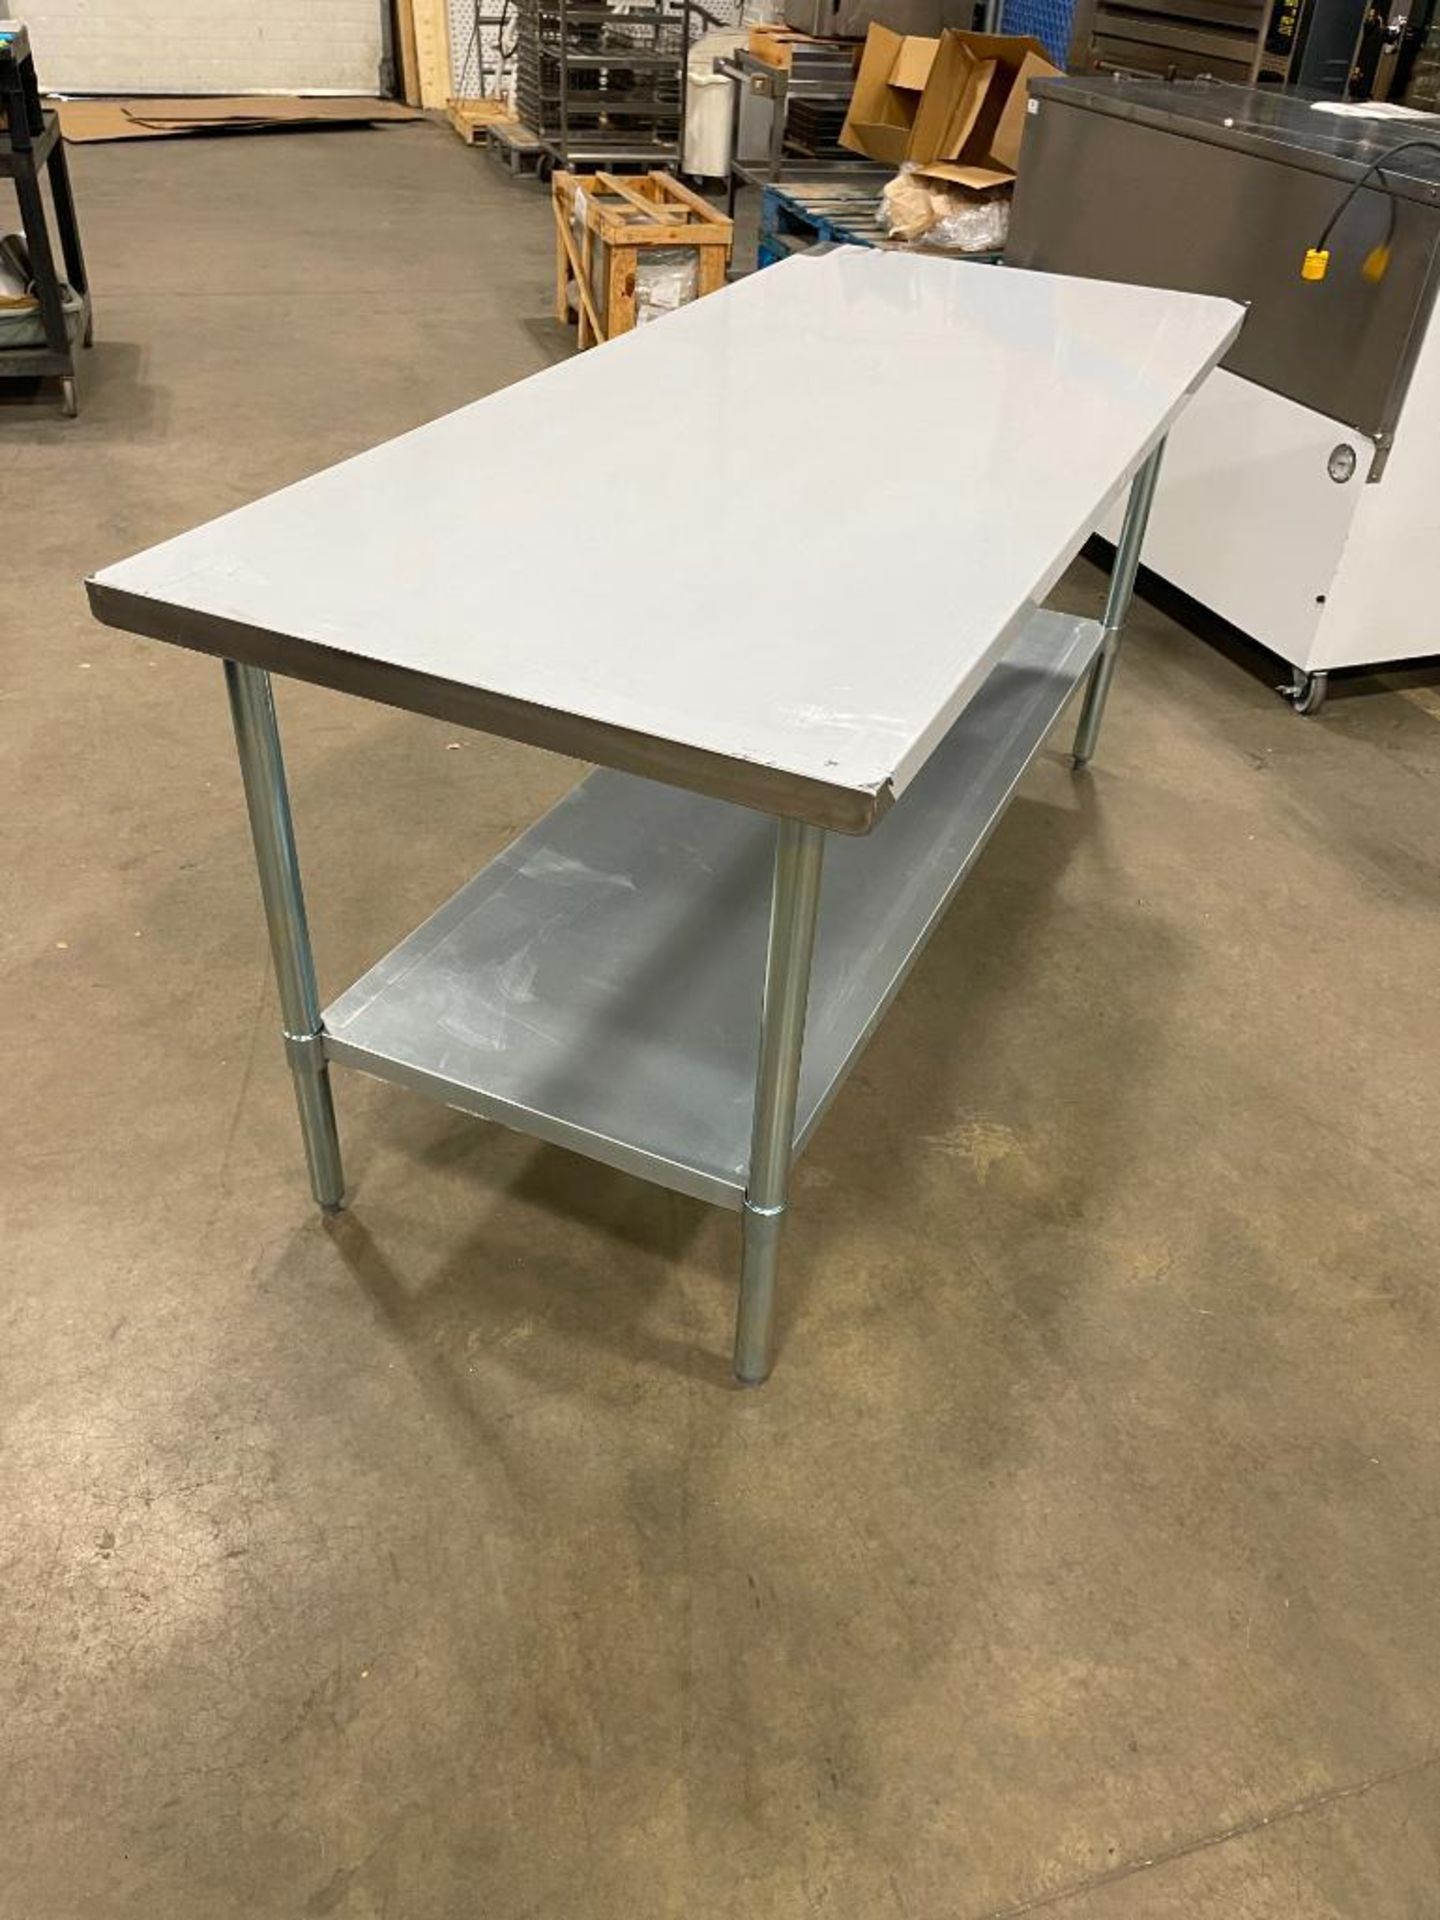 NEW 30" X 72" STAINLESS STEEL WORK TABLE WITH UNDERSHELF - Image 7 of 10